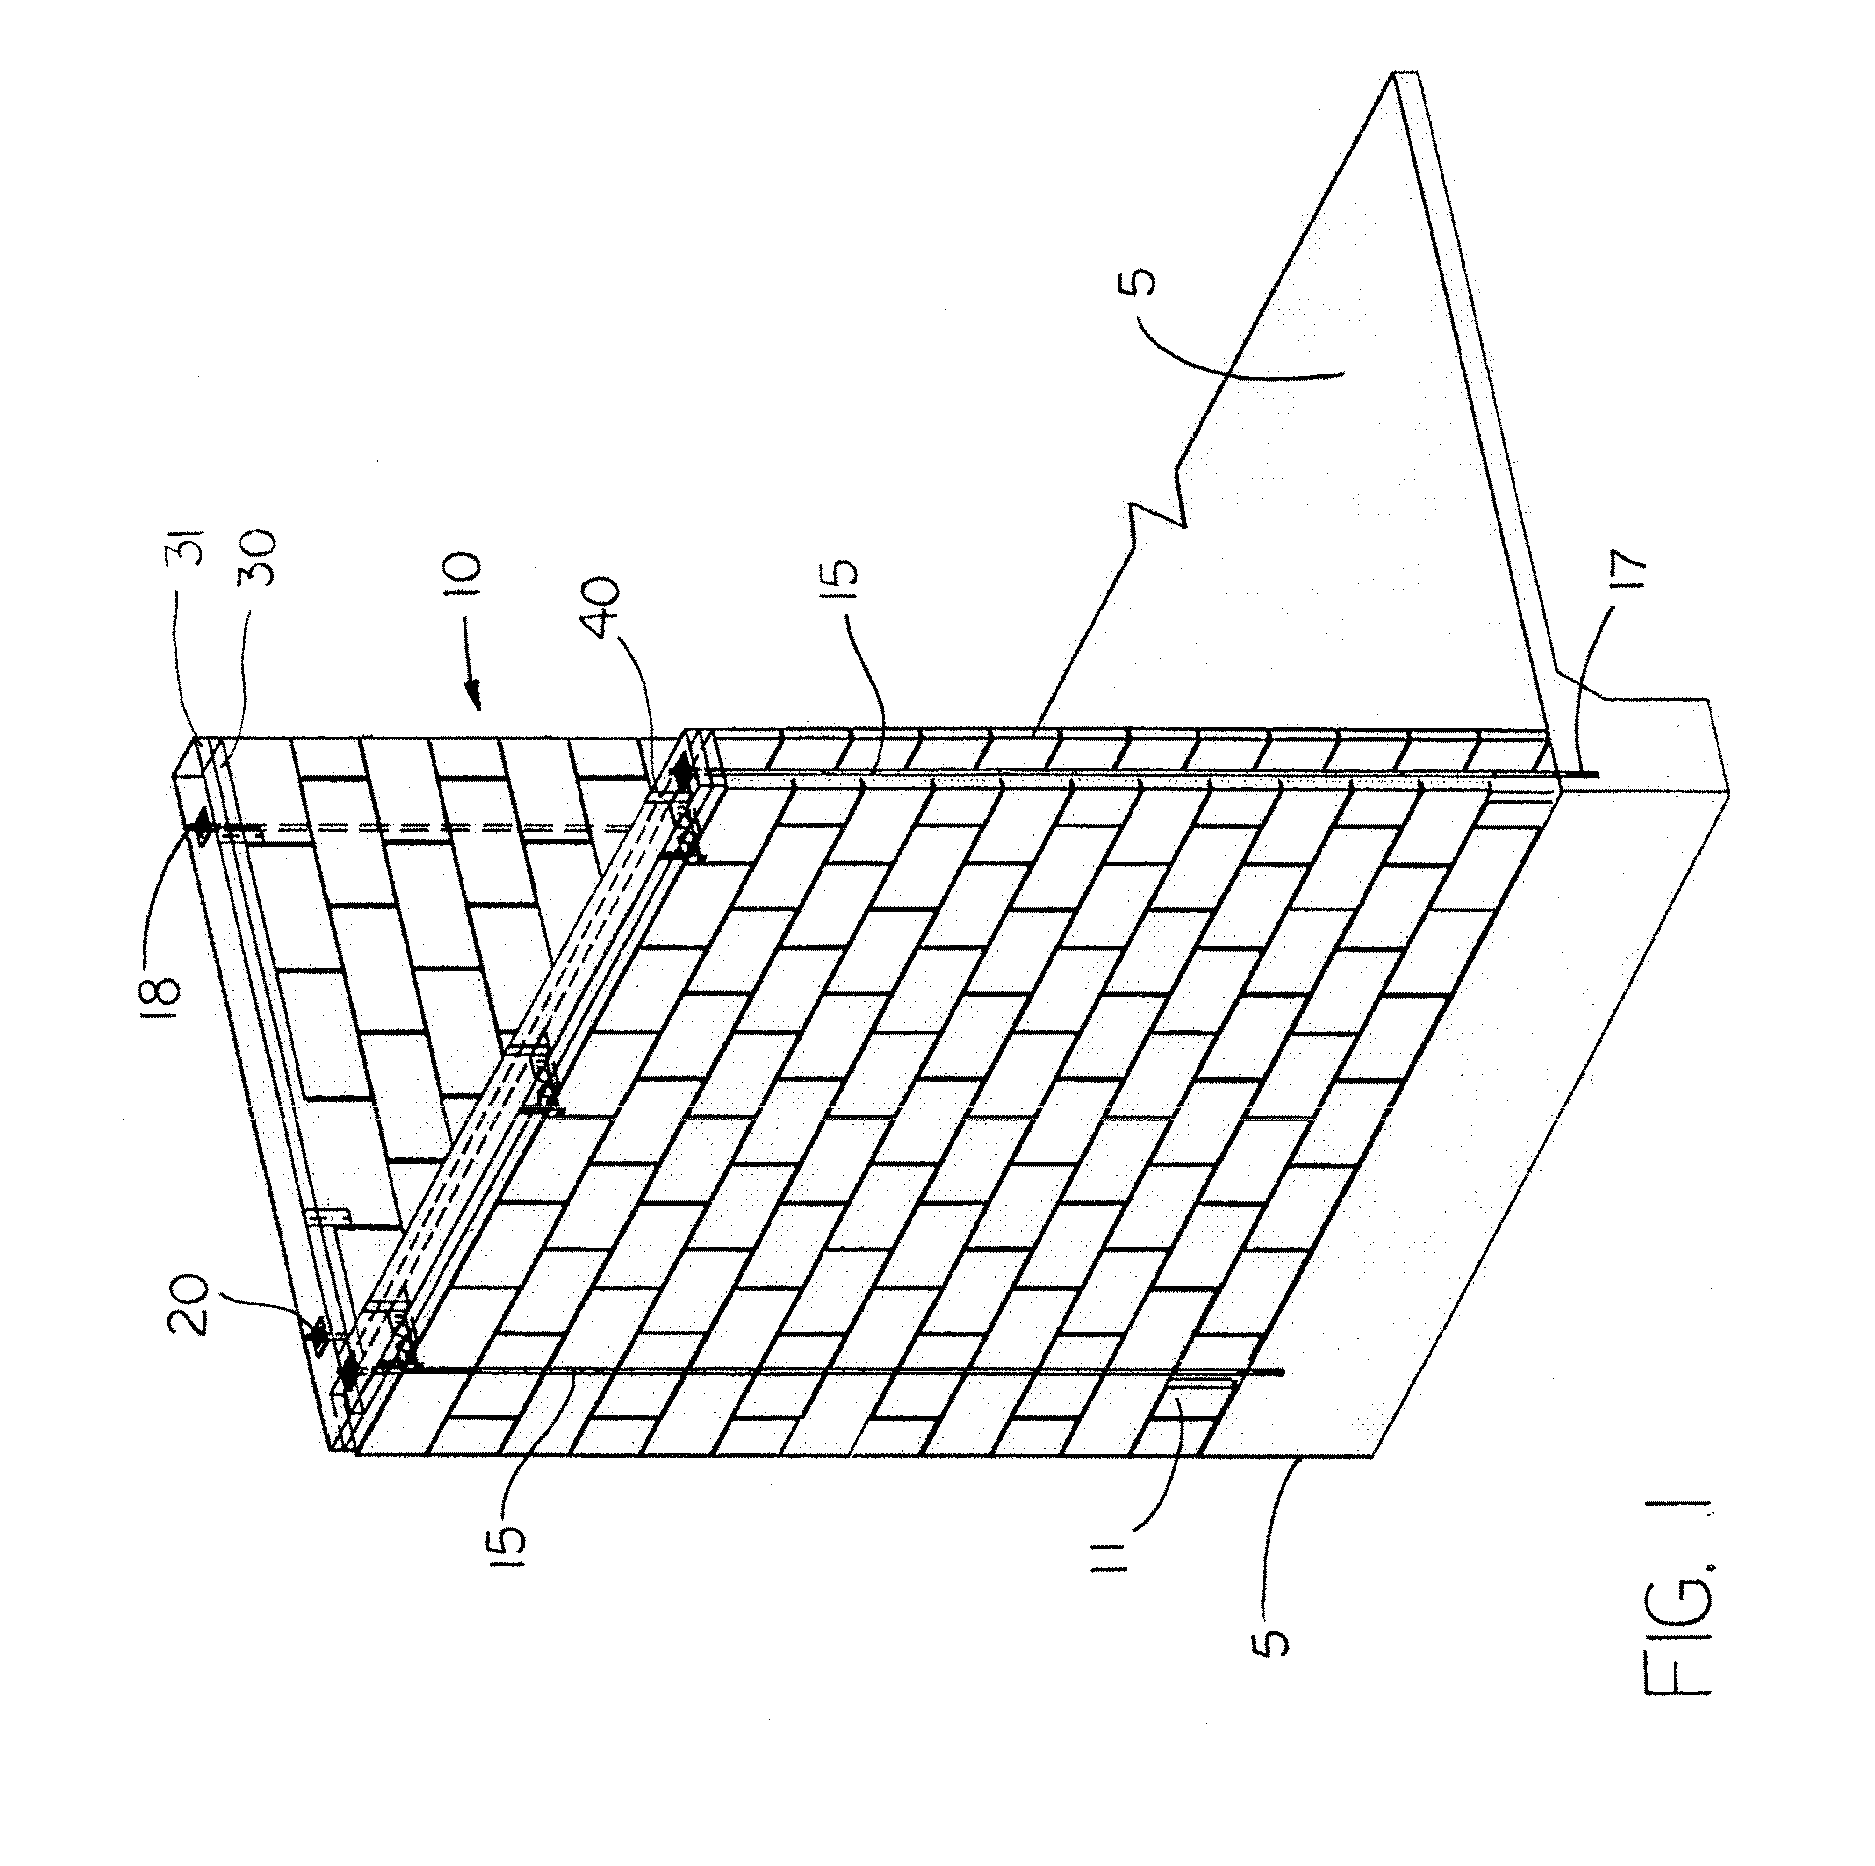 Guide Device for Retaining Ties in Masonry Walls